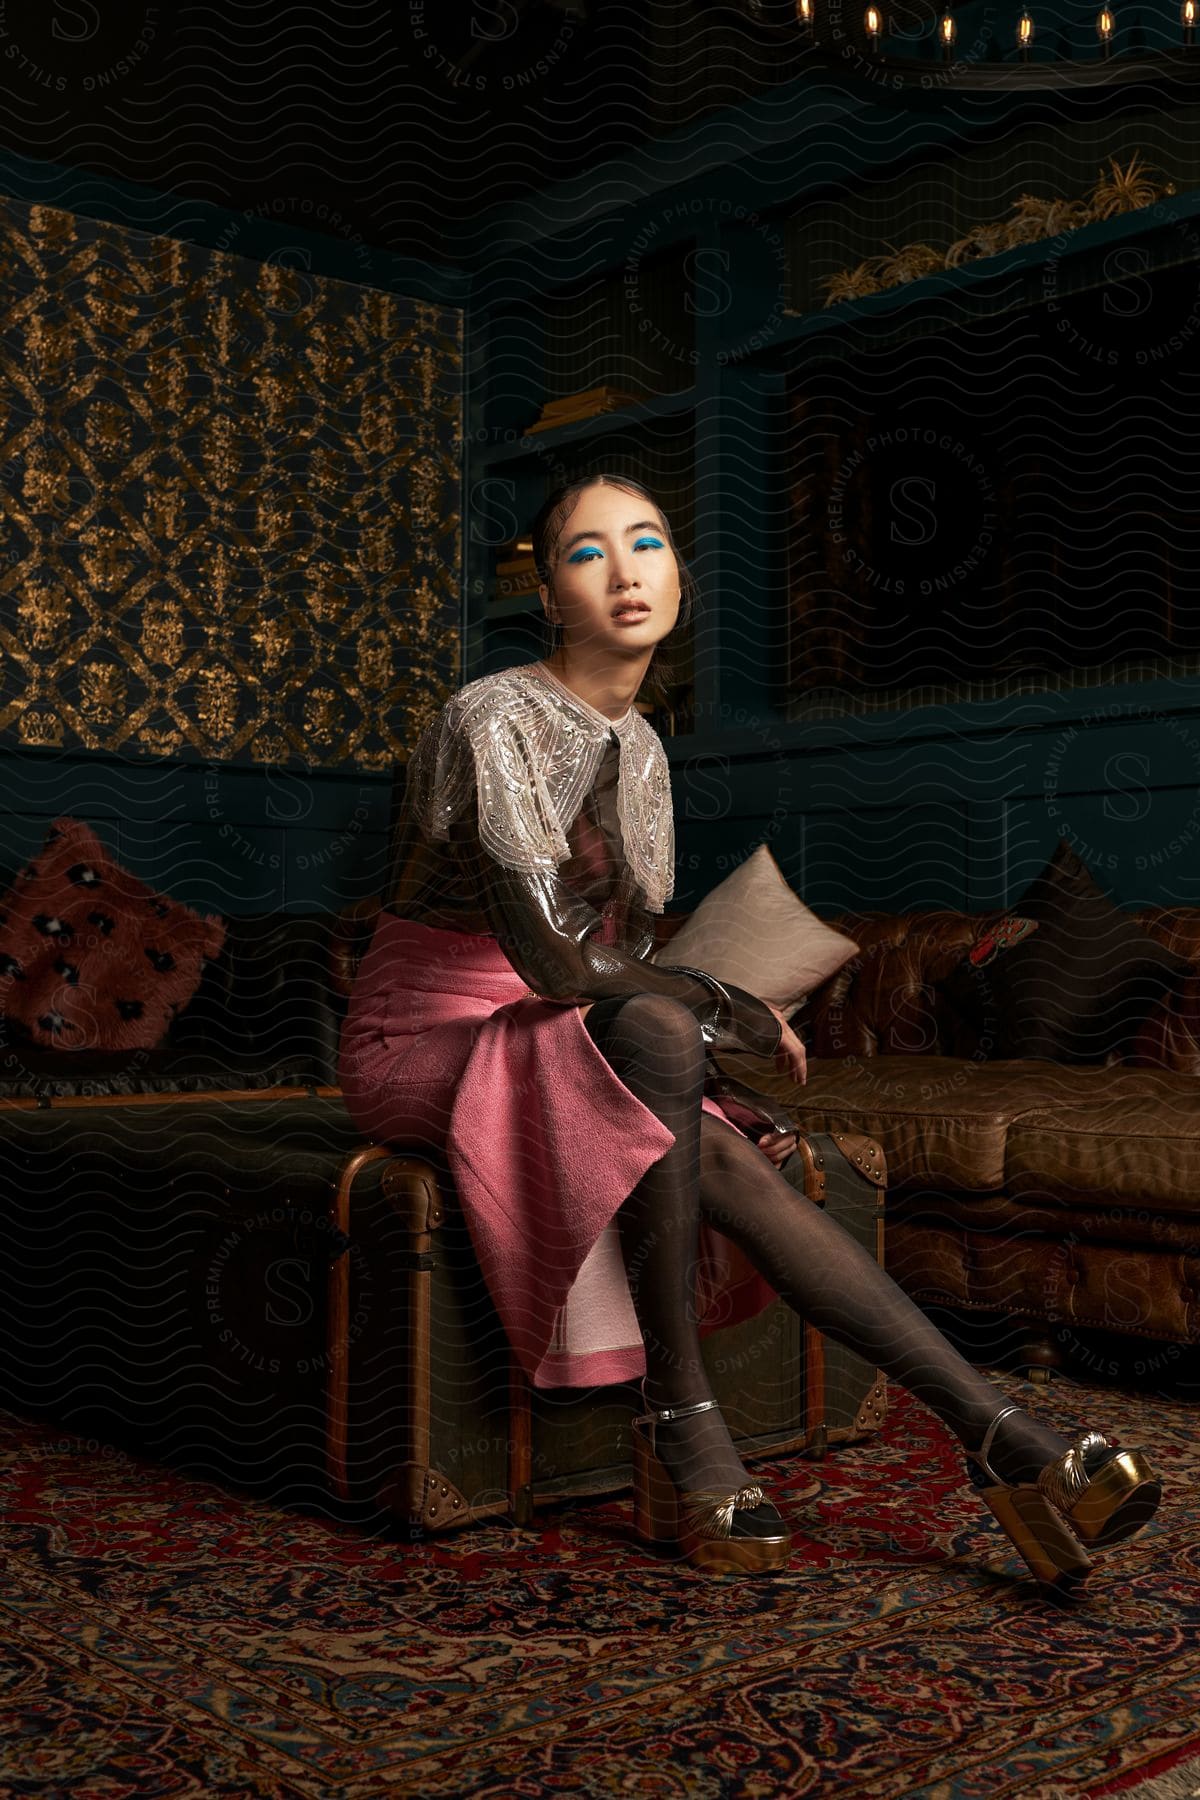 A model sitting on an old trunk in a room decorated with vintage furniture.